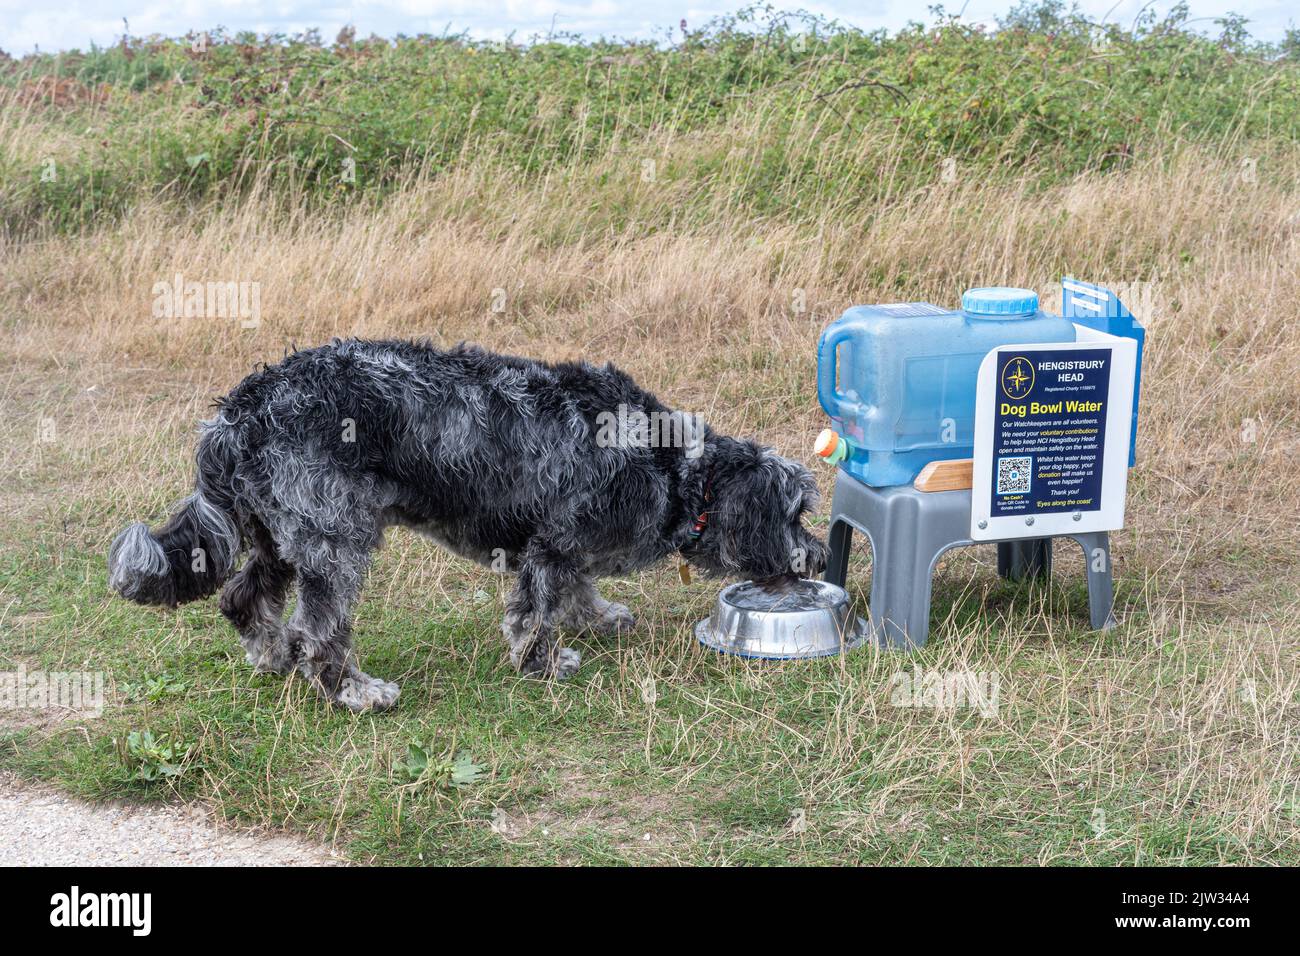 A dog drinking water from a dog bowl provided at Hengistbury Head, asking for donations for the National Coastwatch Institution NCI station, Dorset UK Stock Photo